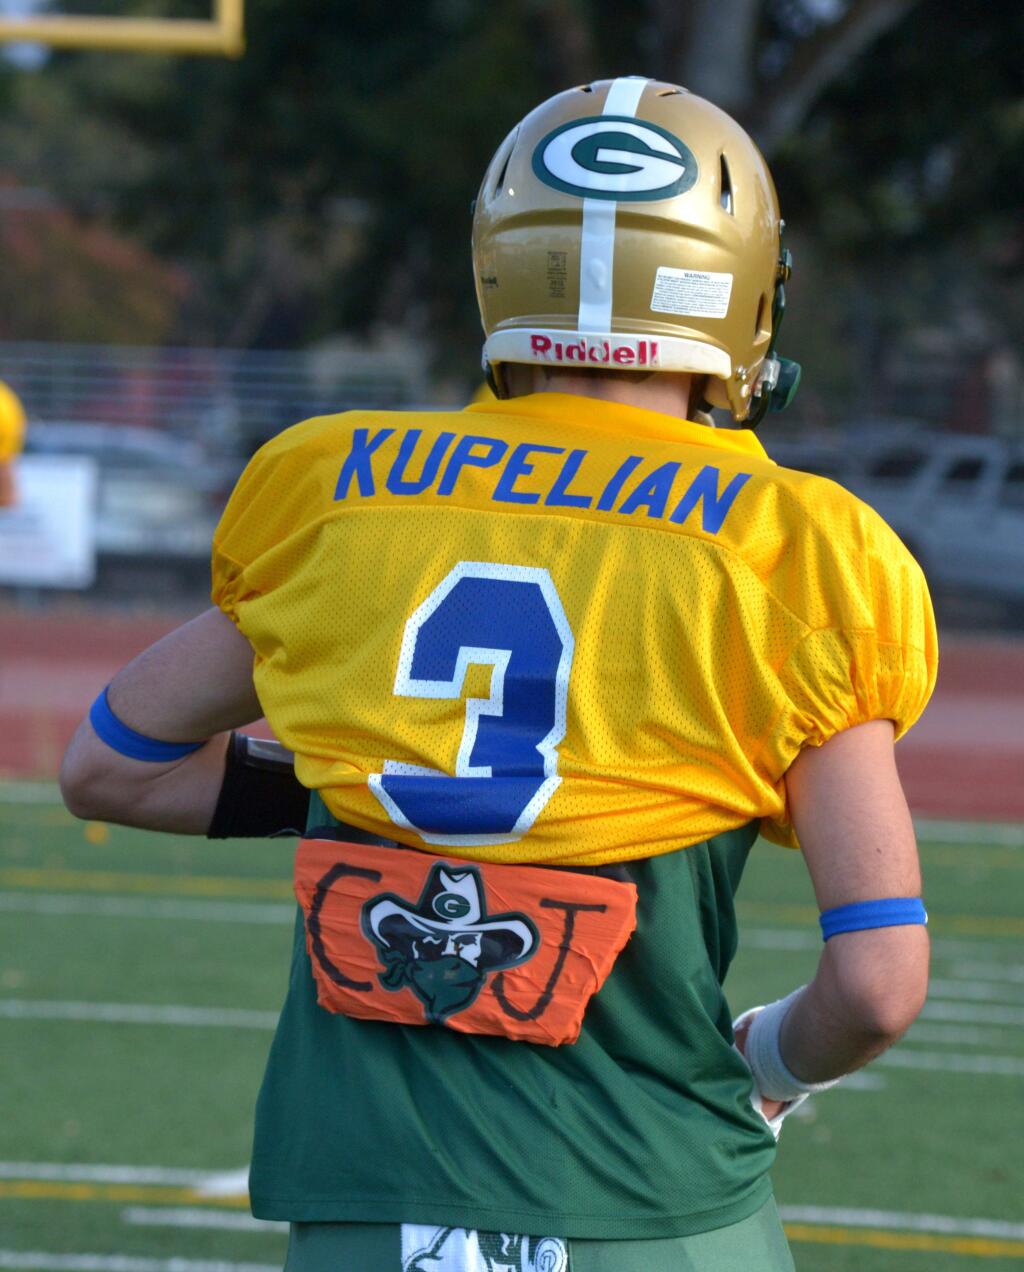 SUMNER FOWLERCasa Grande players like Andre Kupelian honored their young friend CJ Banaszek, who, just days before the game, had lost his battle with leukemia.